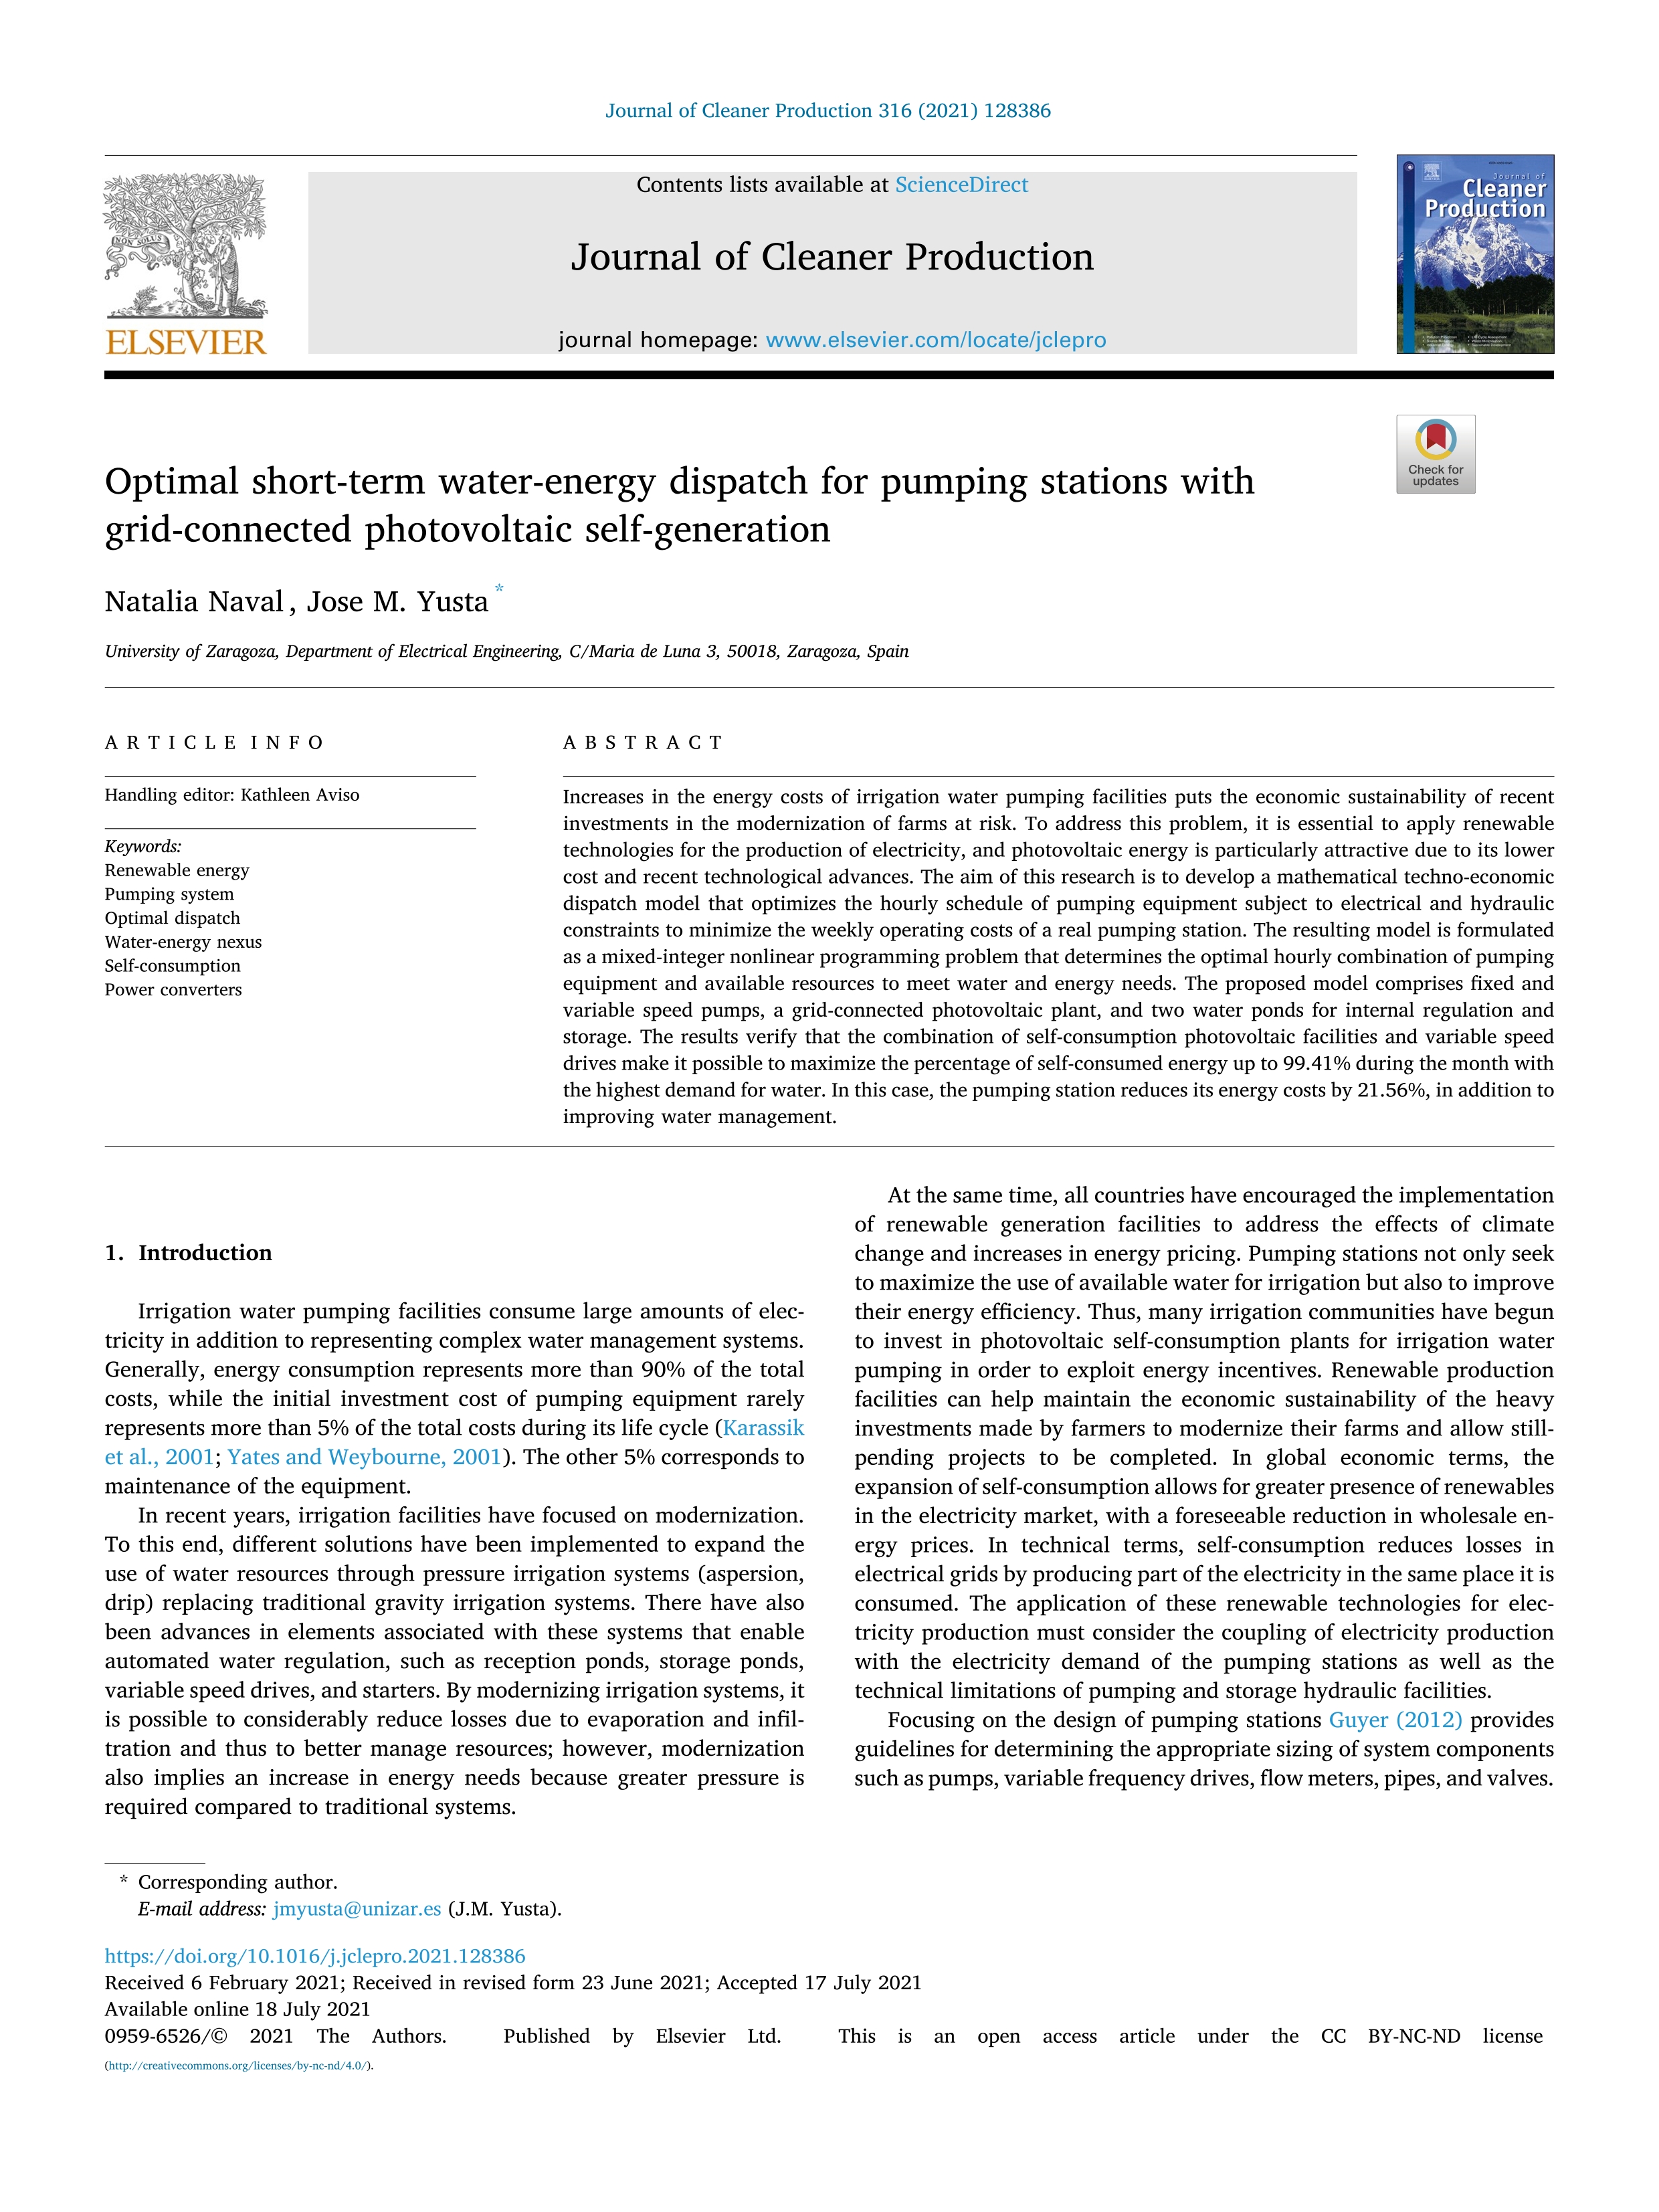 Optimal short-term water-energy dispatch for pumping stations with grid-connected photovoltaic self-generation